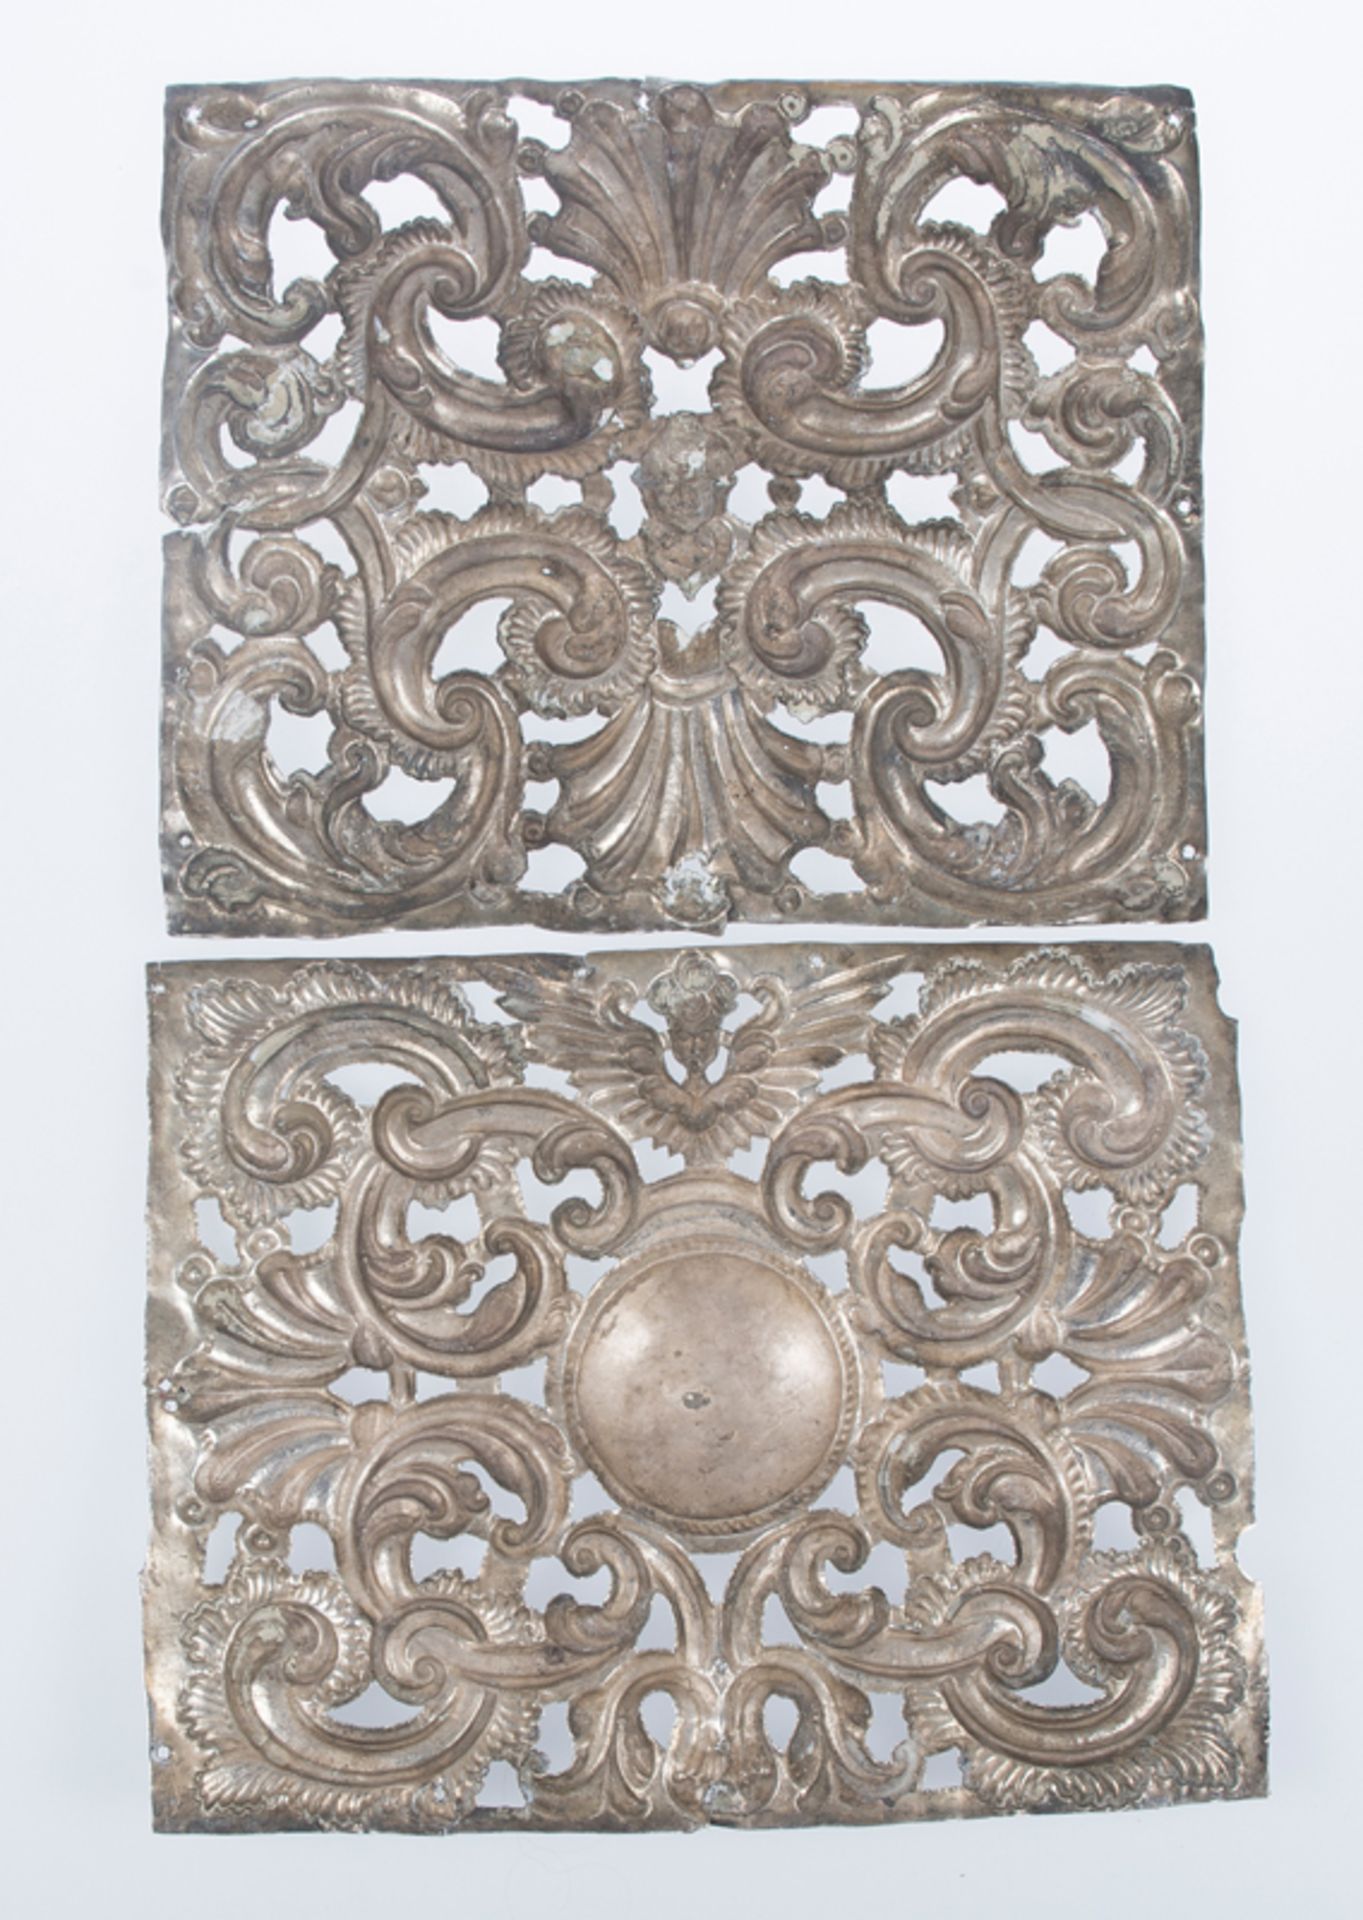 Set of six embossed, chased and pricked silver rosettes. Viceroyalty work. Peru. 18th centurySet - Image 4 of 6